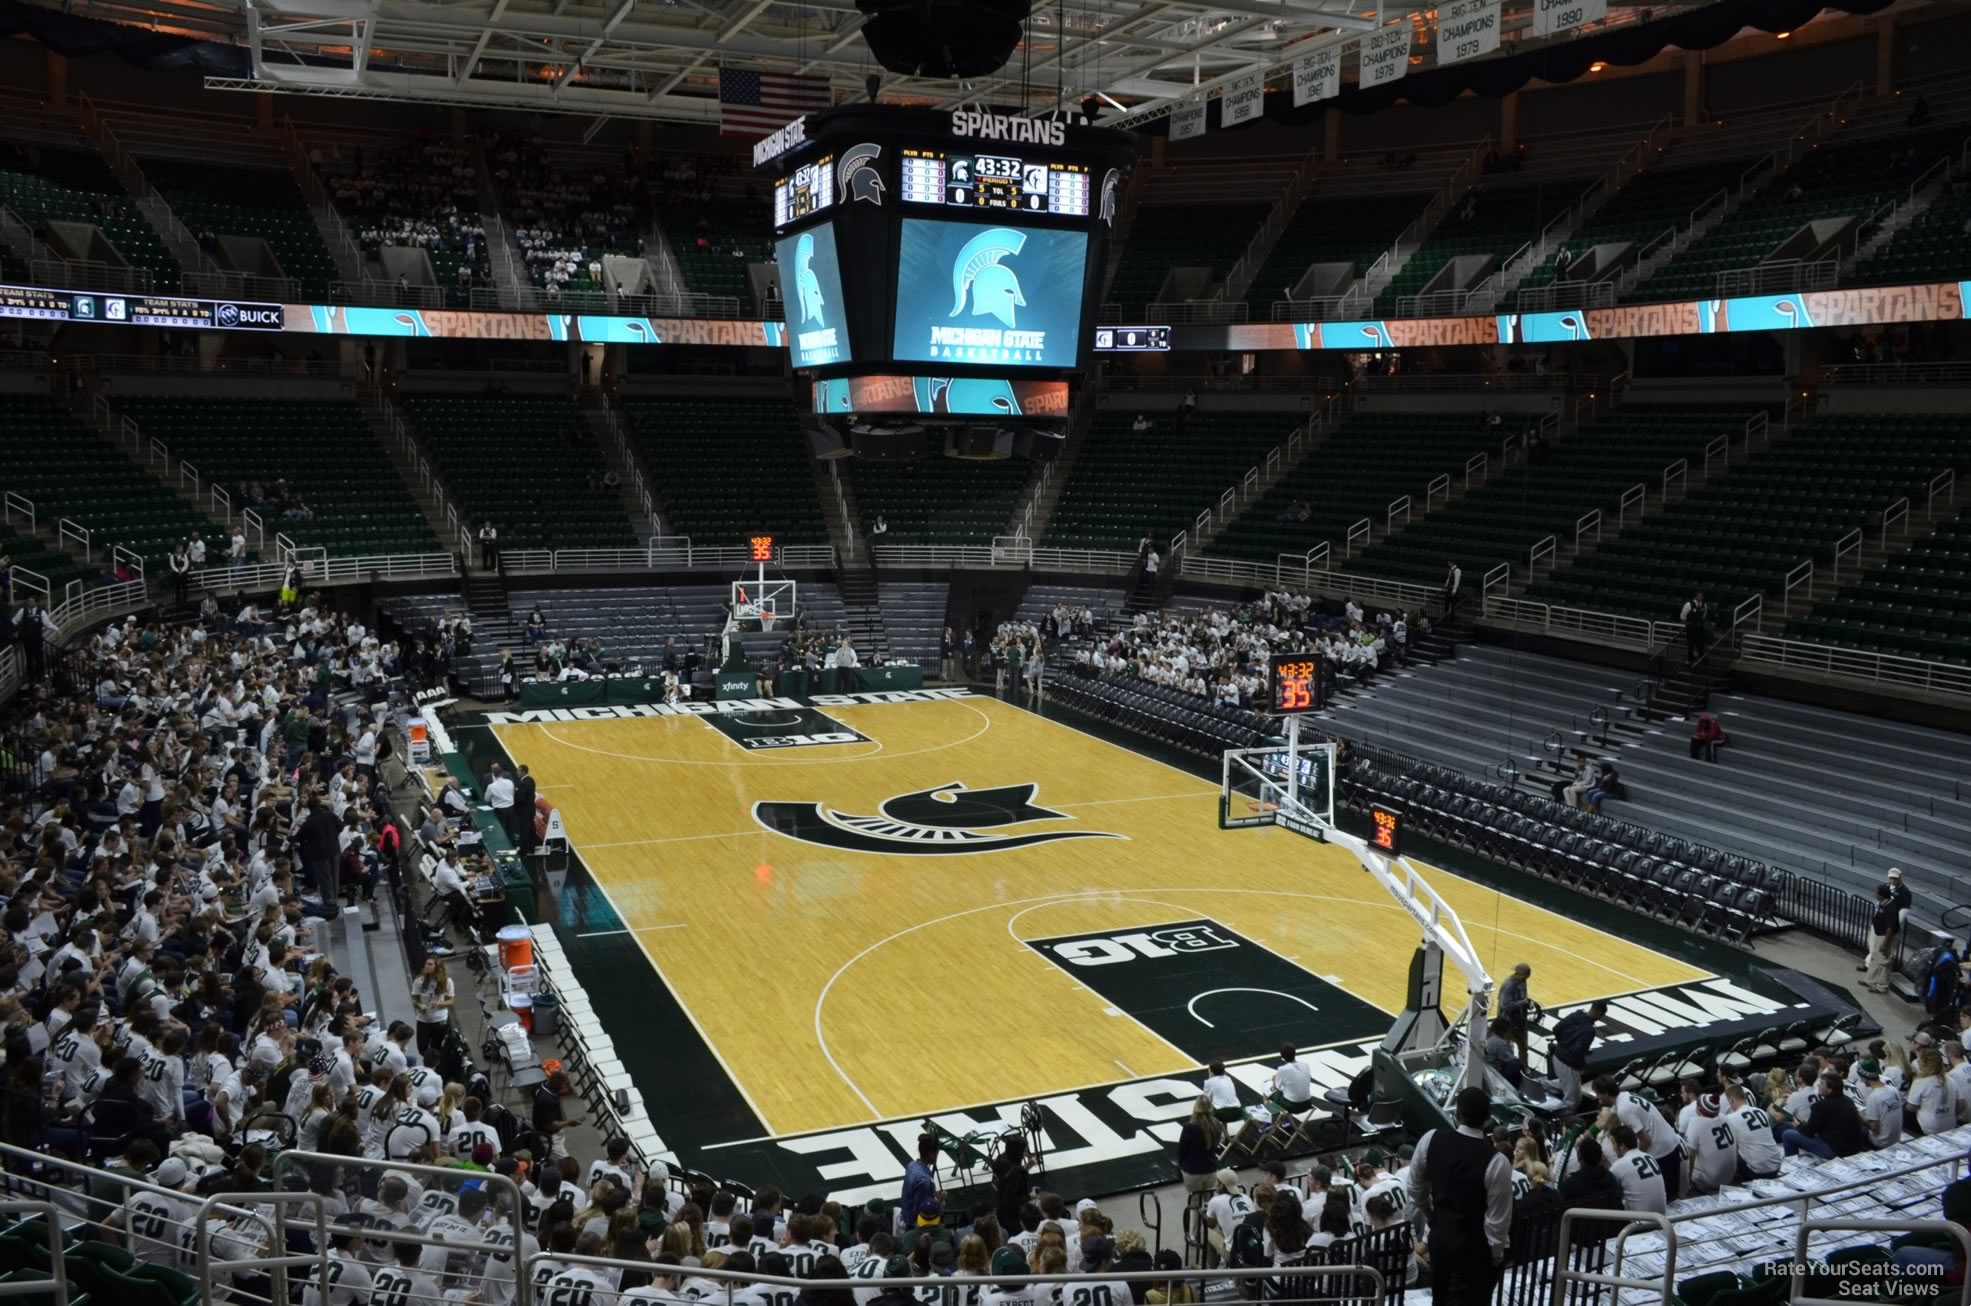 section 104, row 22 seat view  - breslin center